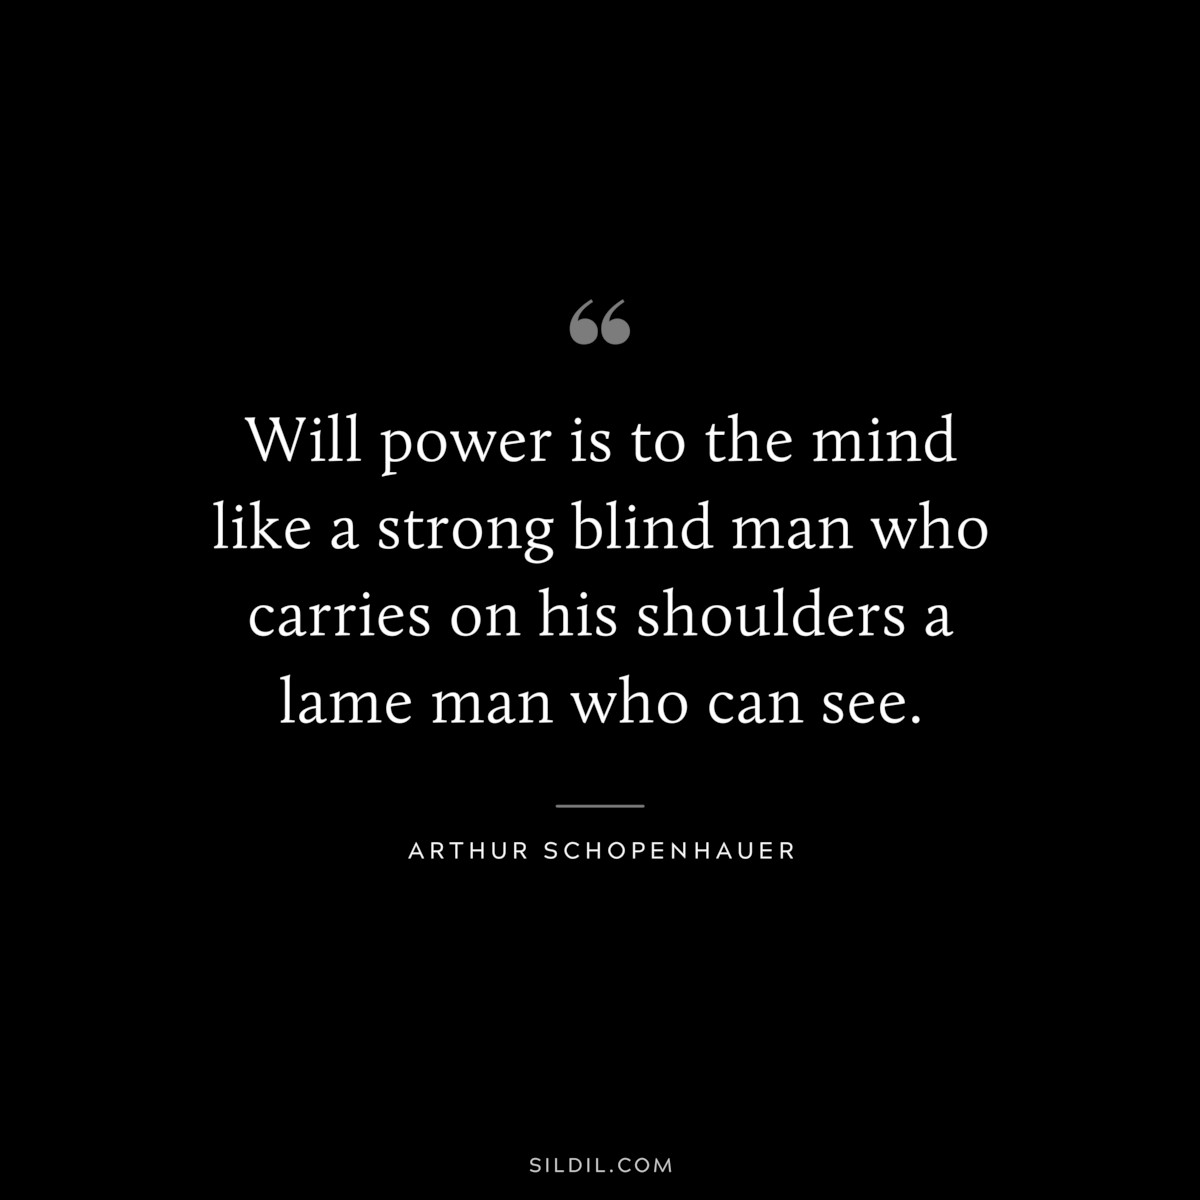 Will power is to the mind like a strong blind man who carries on his shoulders a lame man who can see. ― Arthur Schopenhauer